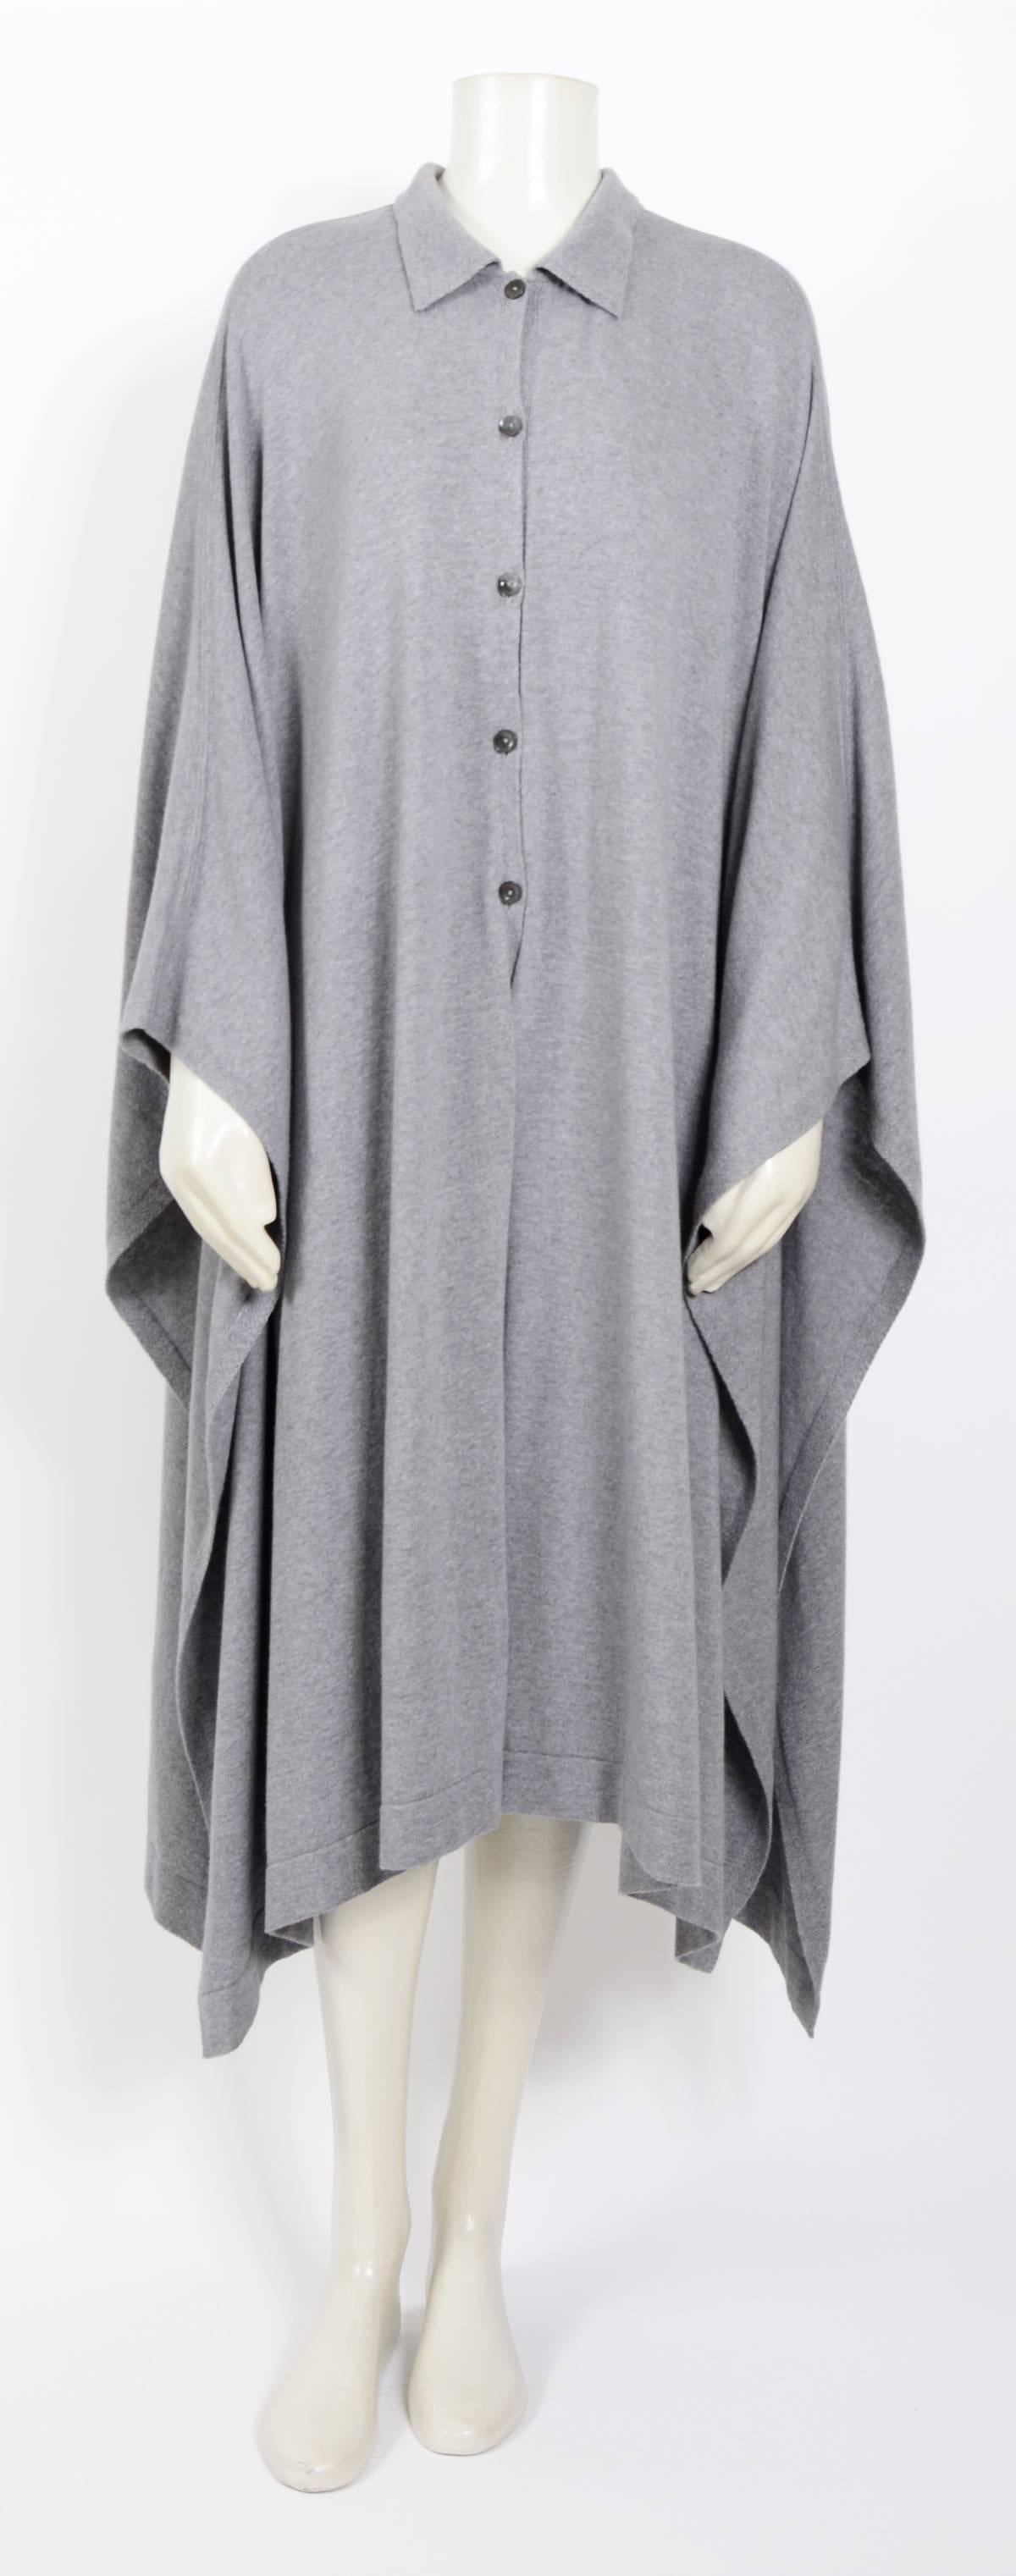 Angelo Tarlazzi vintage 1970s grey knit cape. 
Very comfortable and soft.
Mix 50% Viscose - 30% Cashmere - 20% Polyamide.
French Size 42